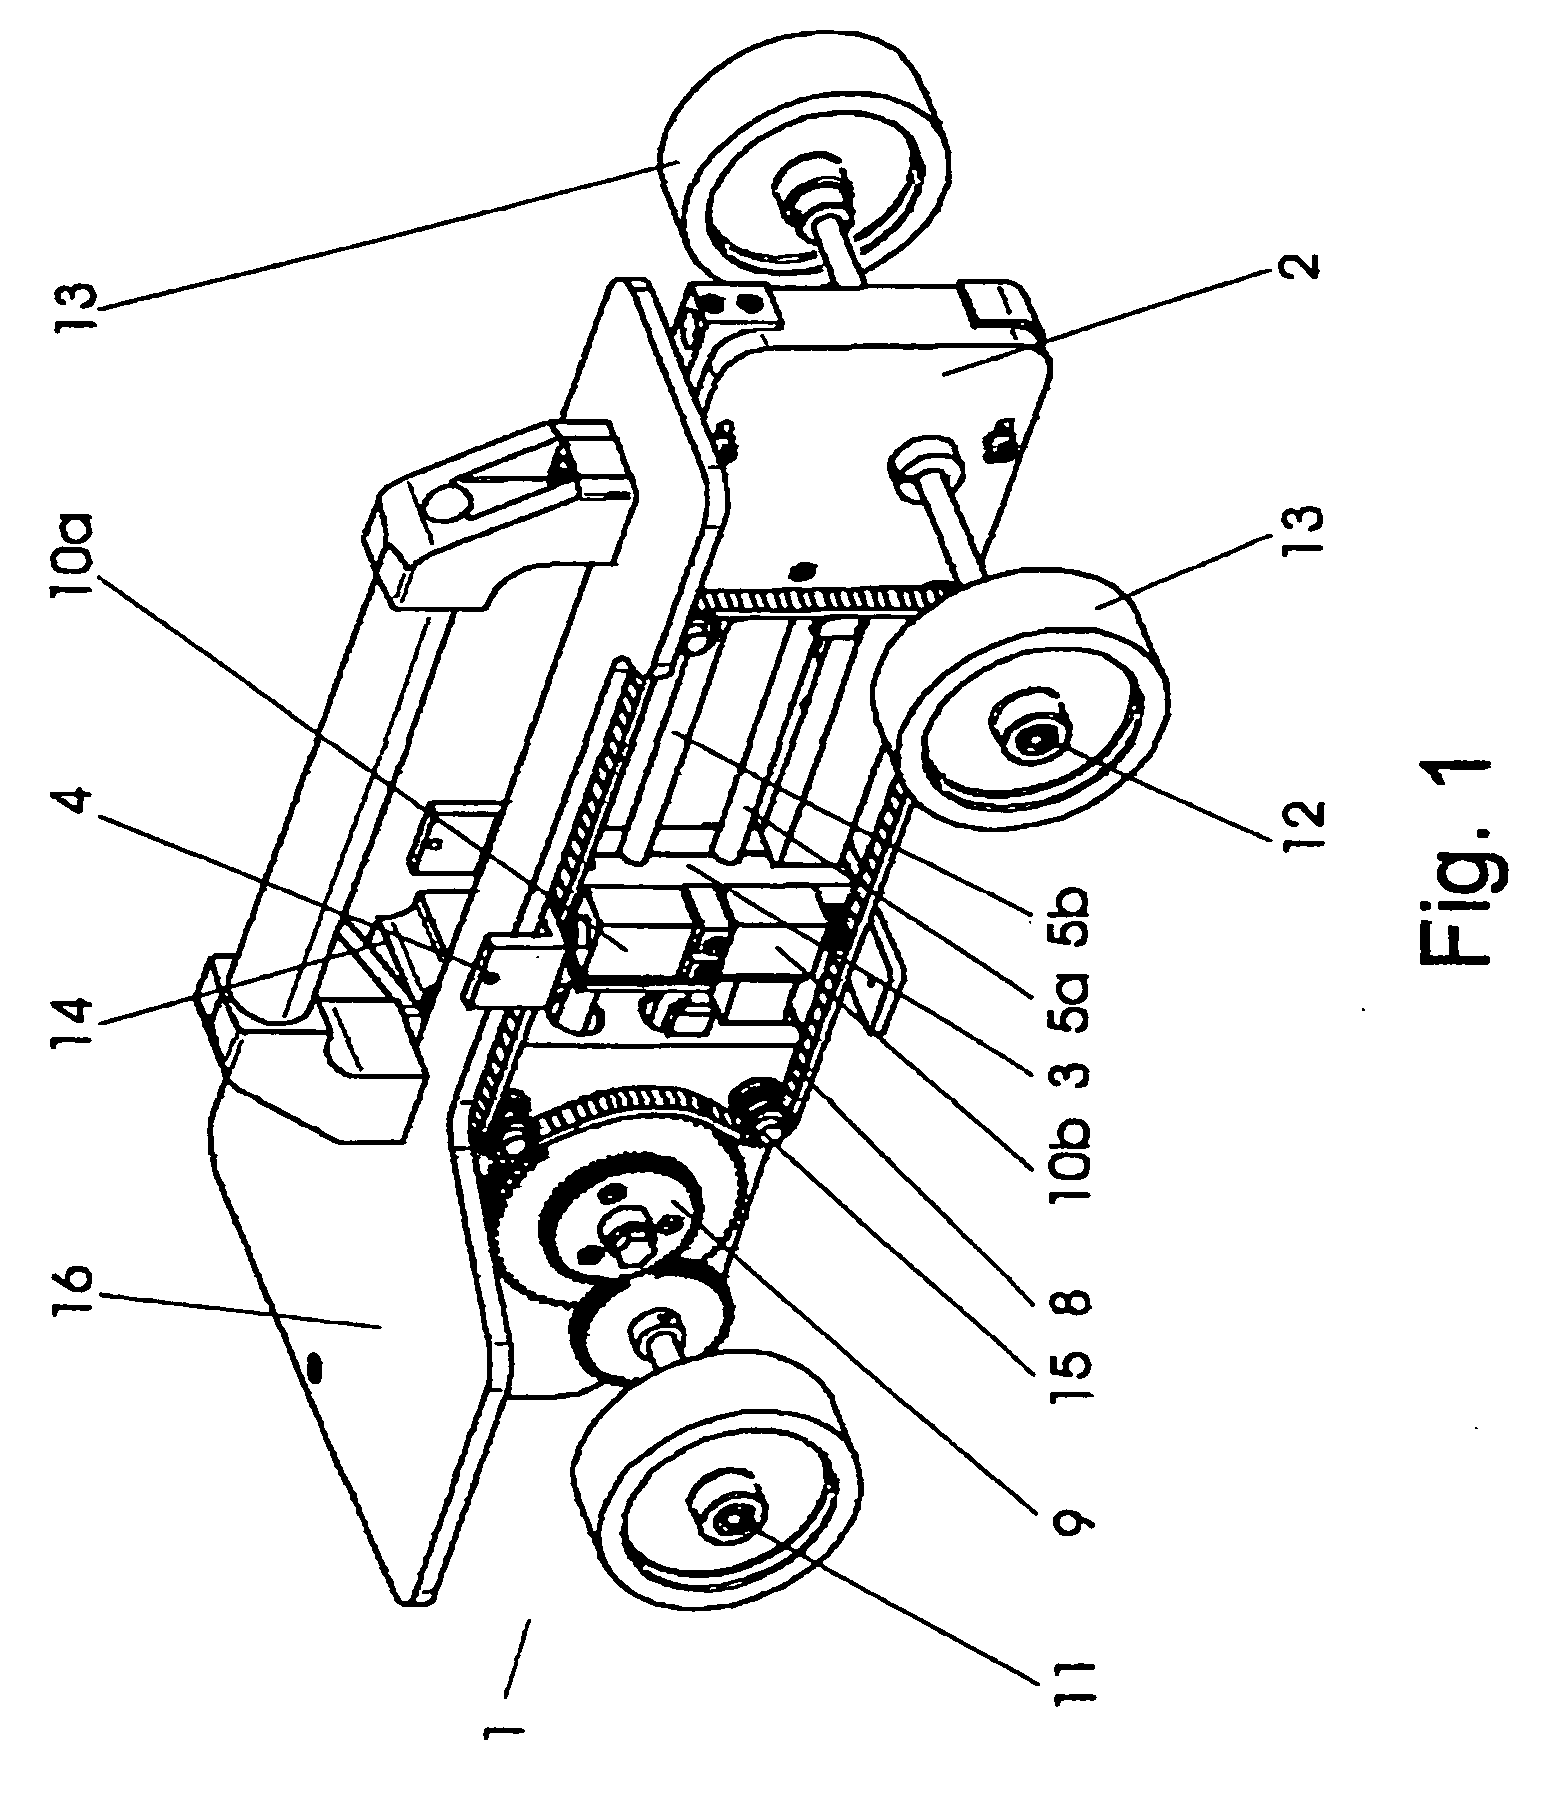 Positioning vehicle for positioning a test probe